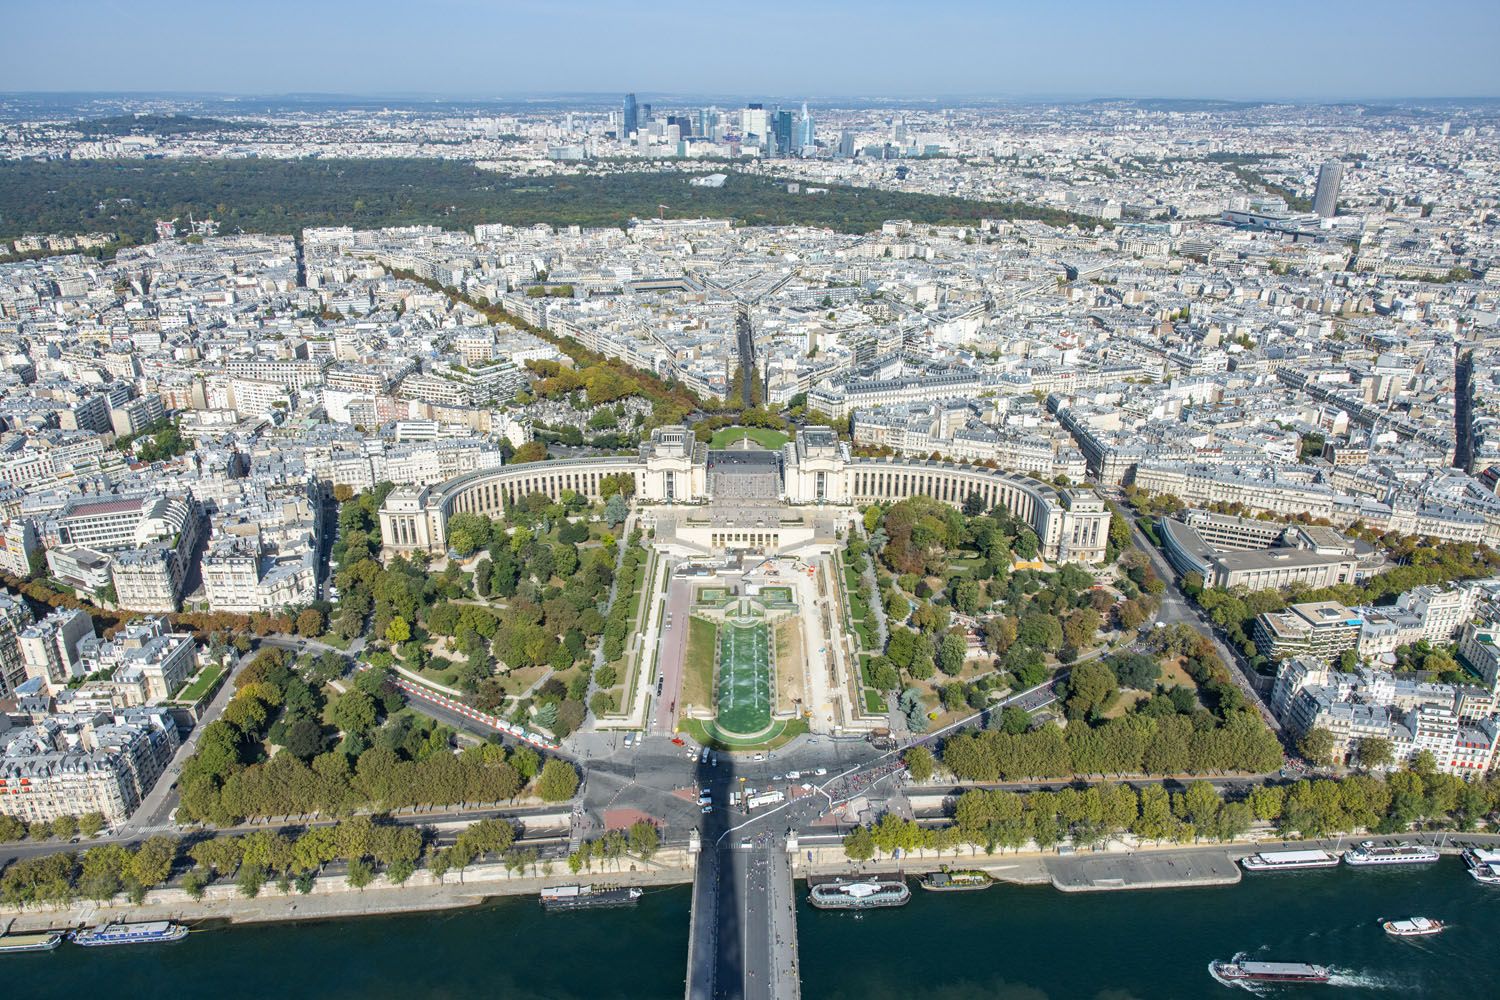 Eiffel Tower Trocadero View | How to Visit the Eiffel Tower